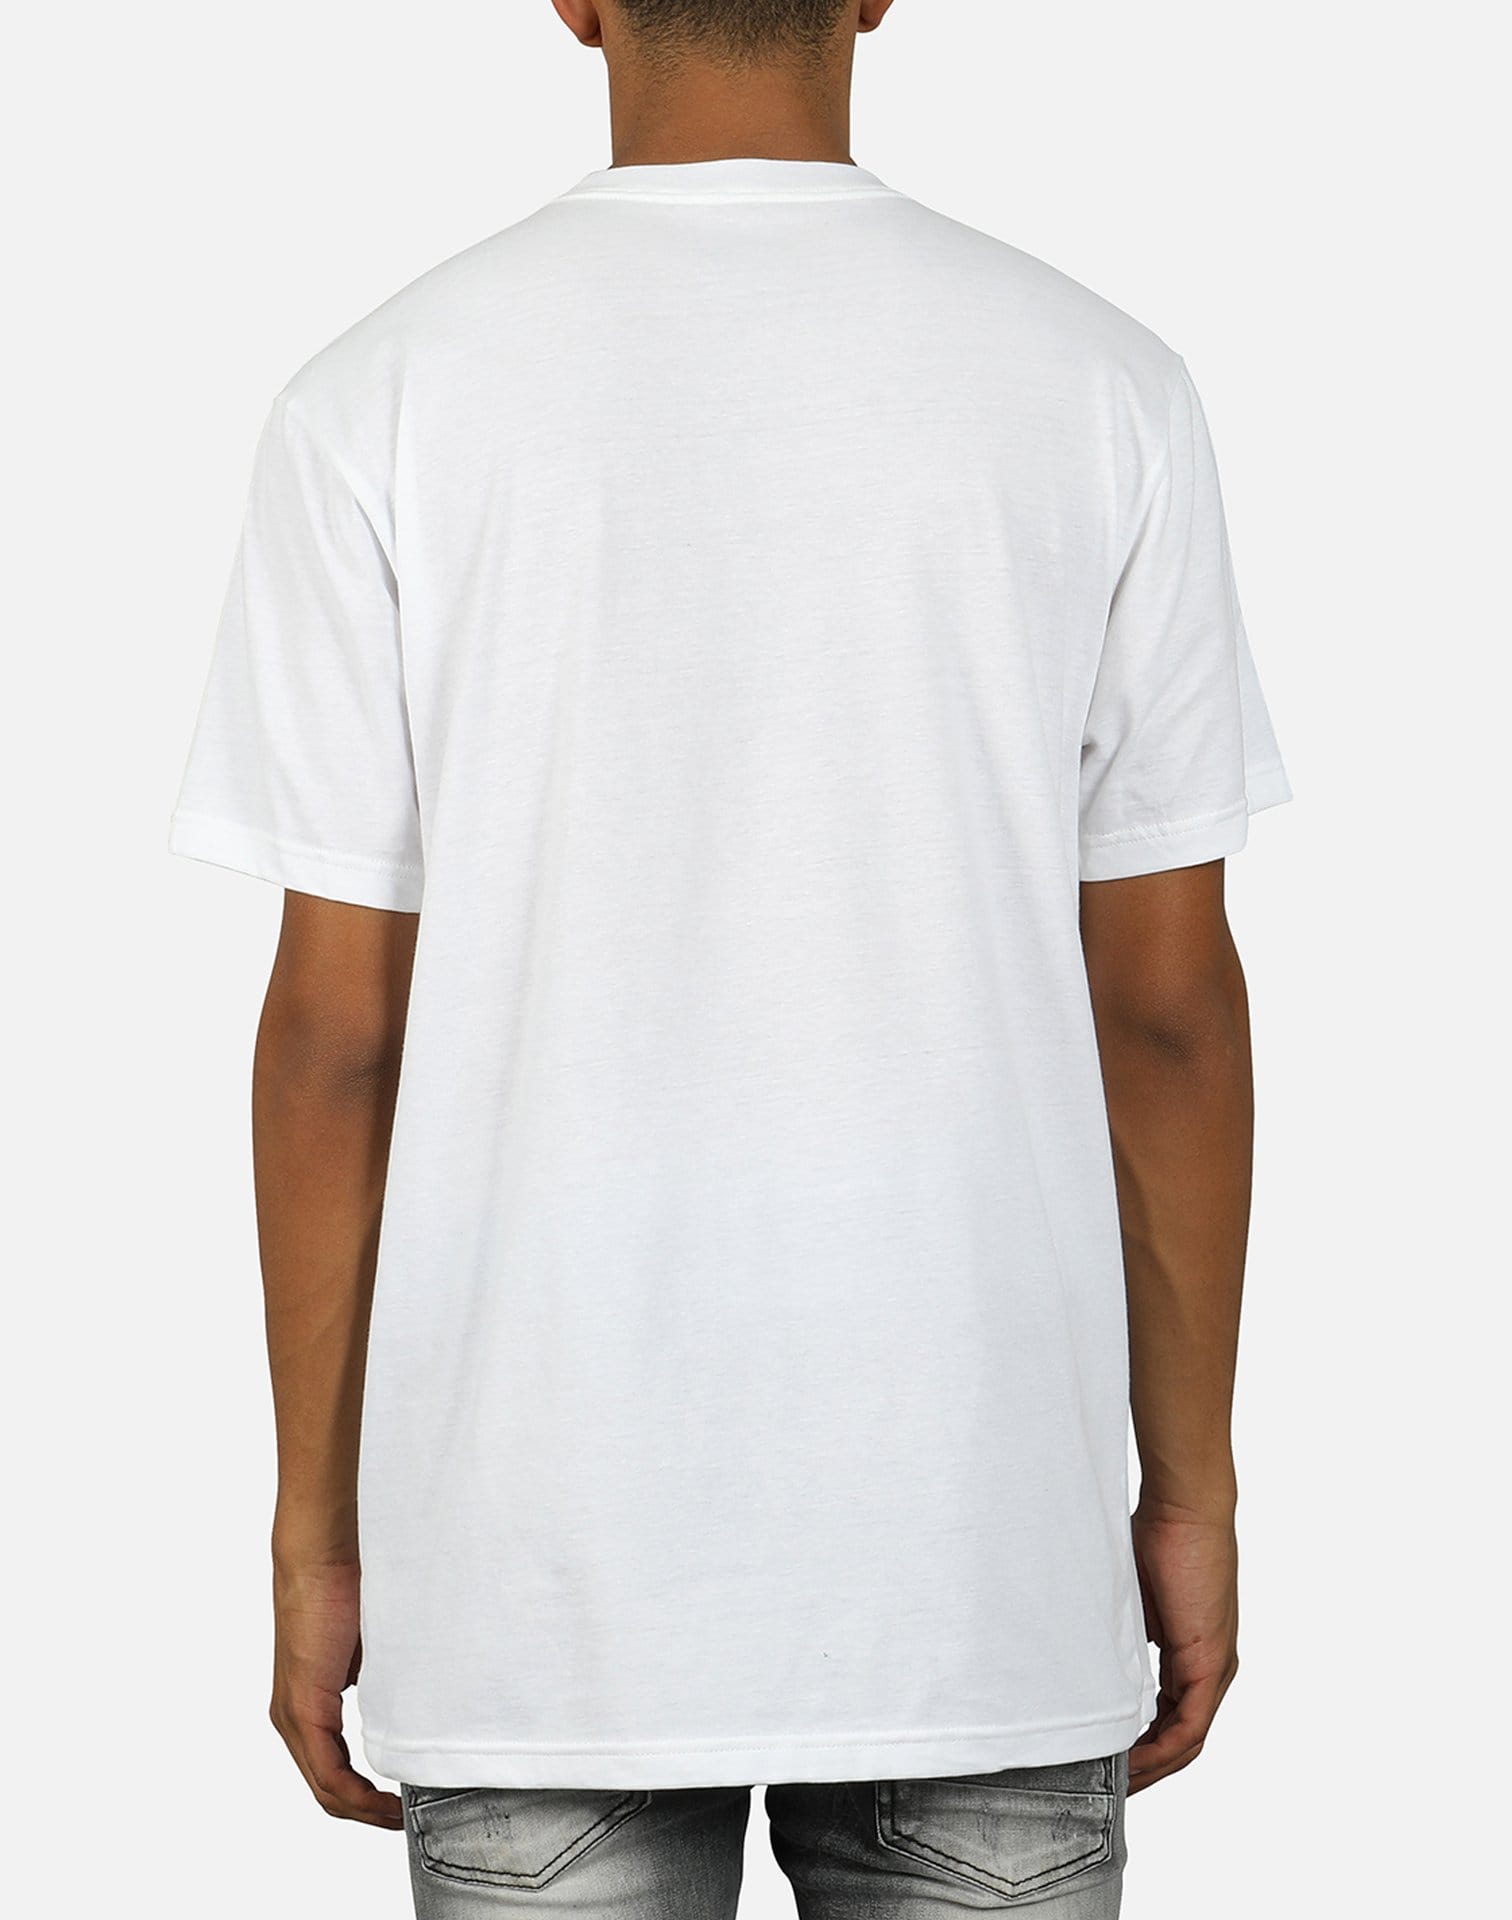 The North Face Men's Edge to Edge Tee